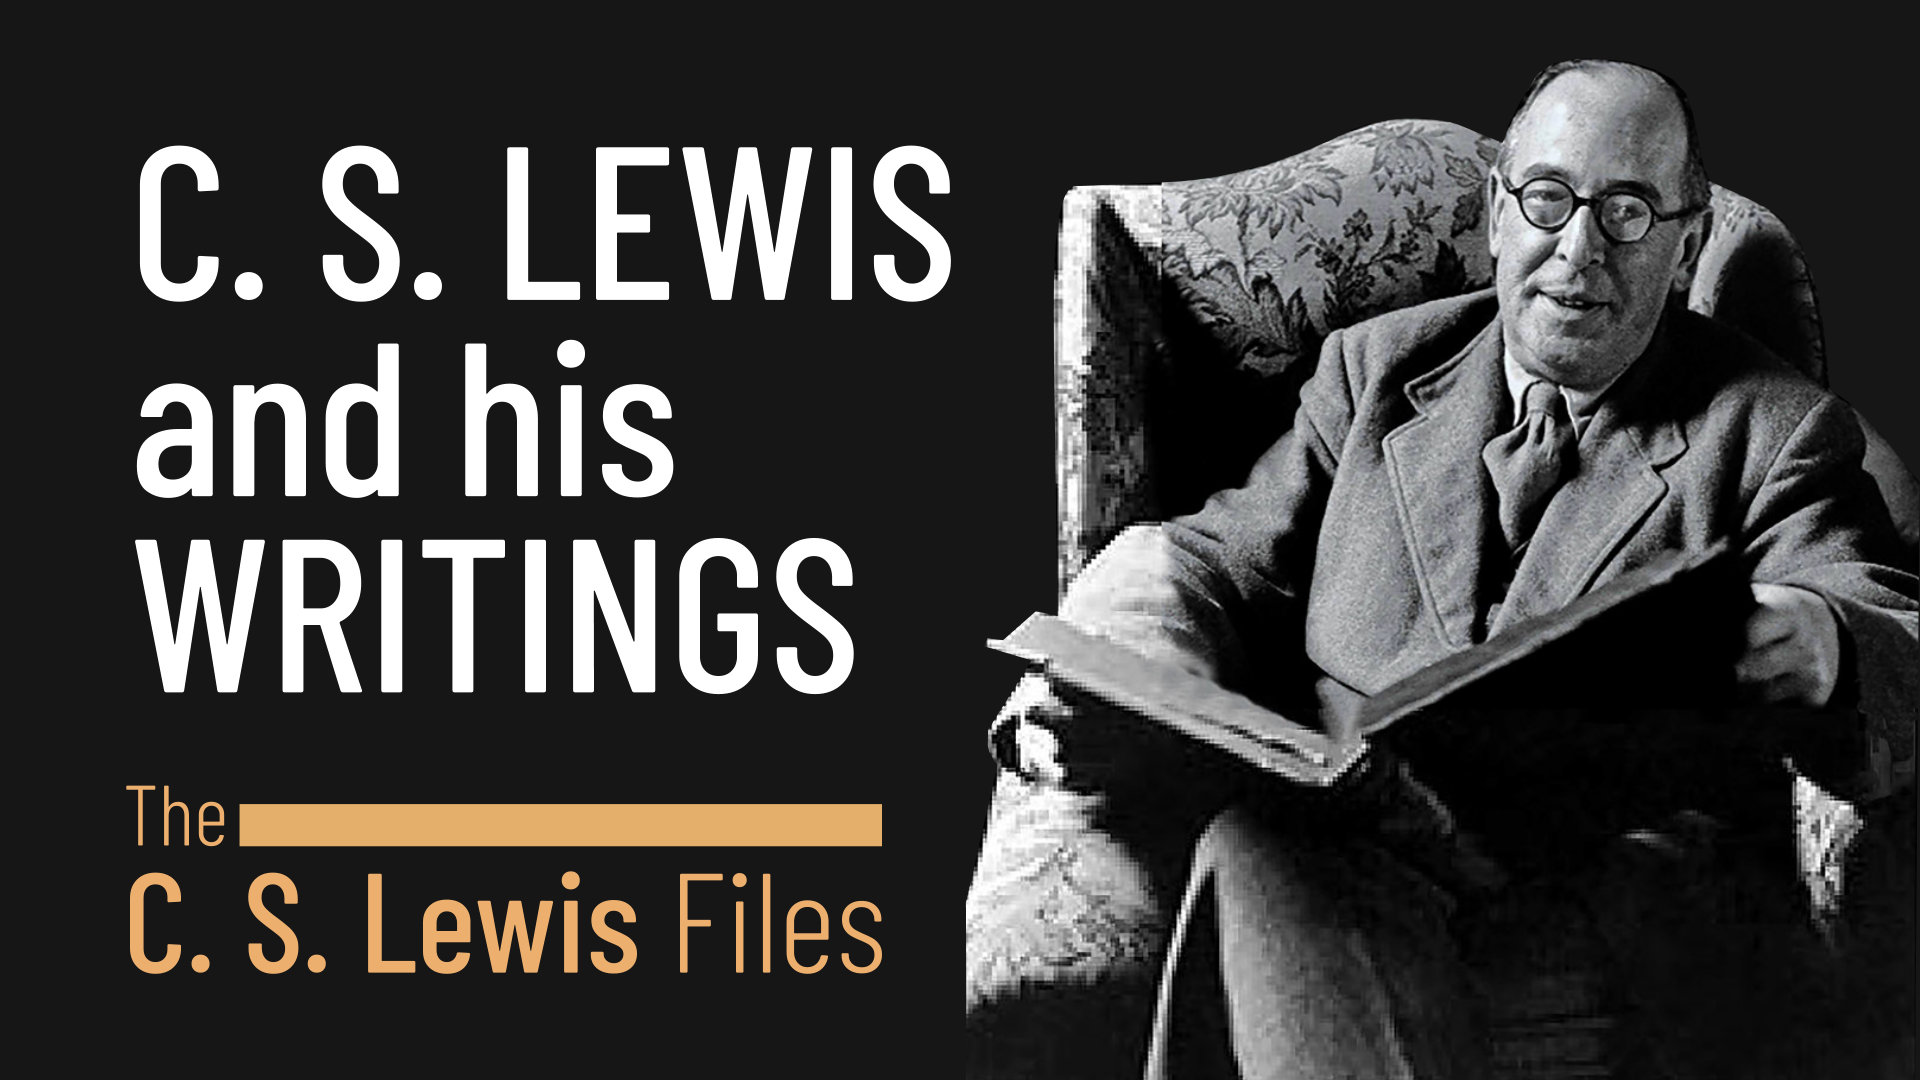 The C.S. Lewis Files - An Introduction to C.S. Lewis and His Writings